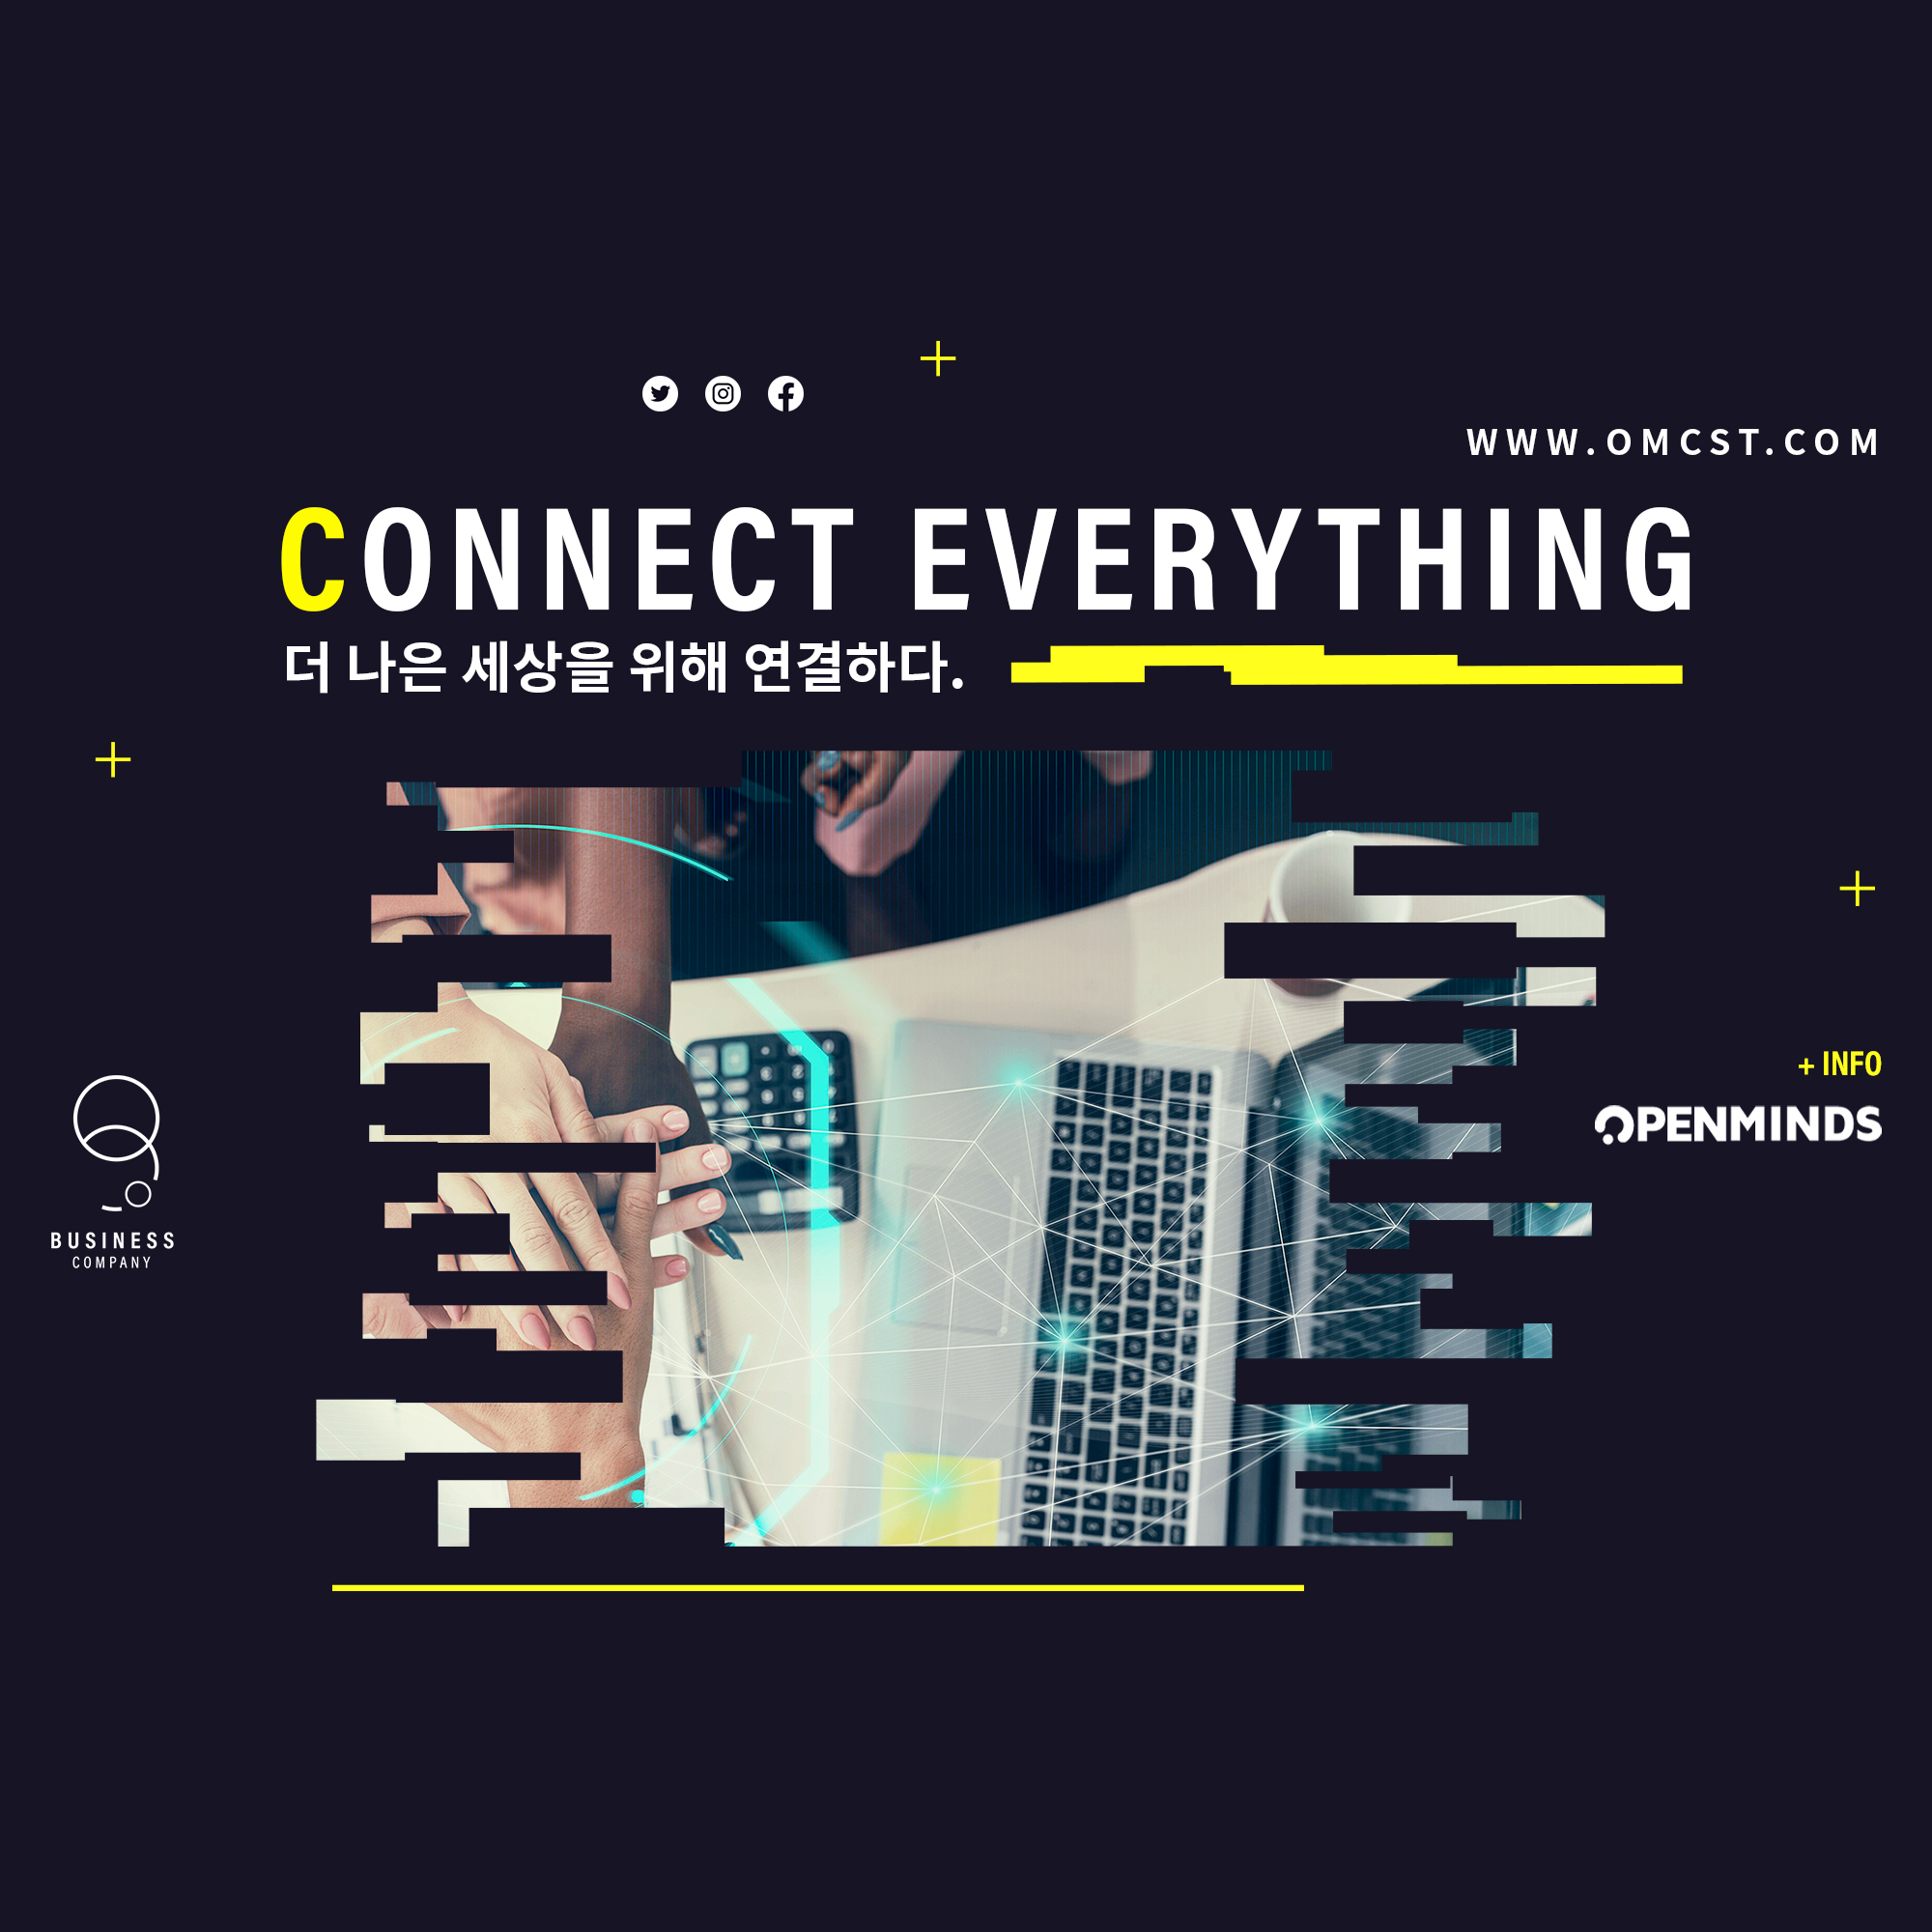 CONNECT EVERYTHING